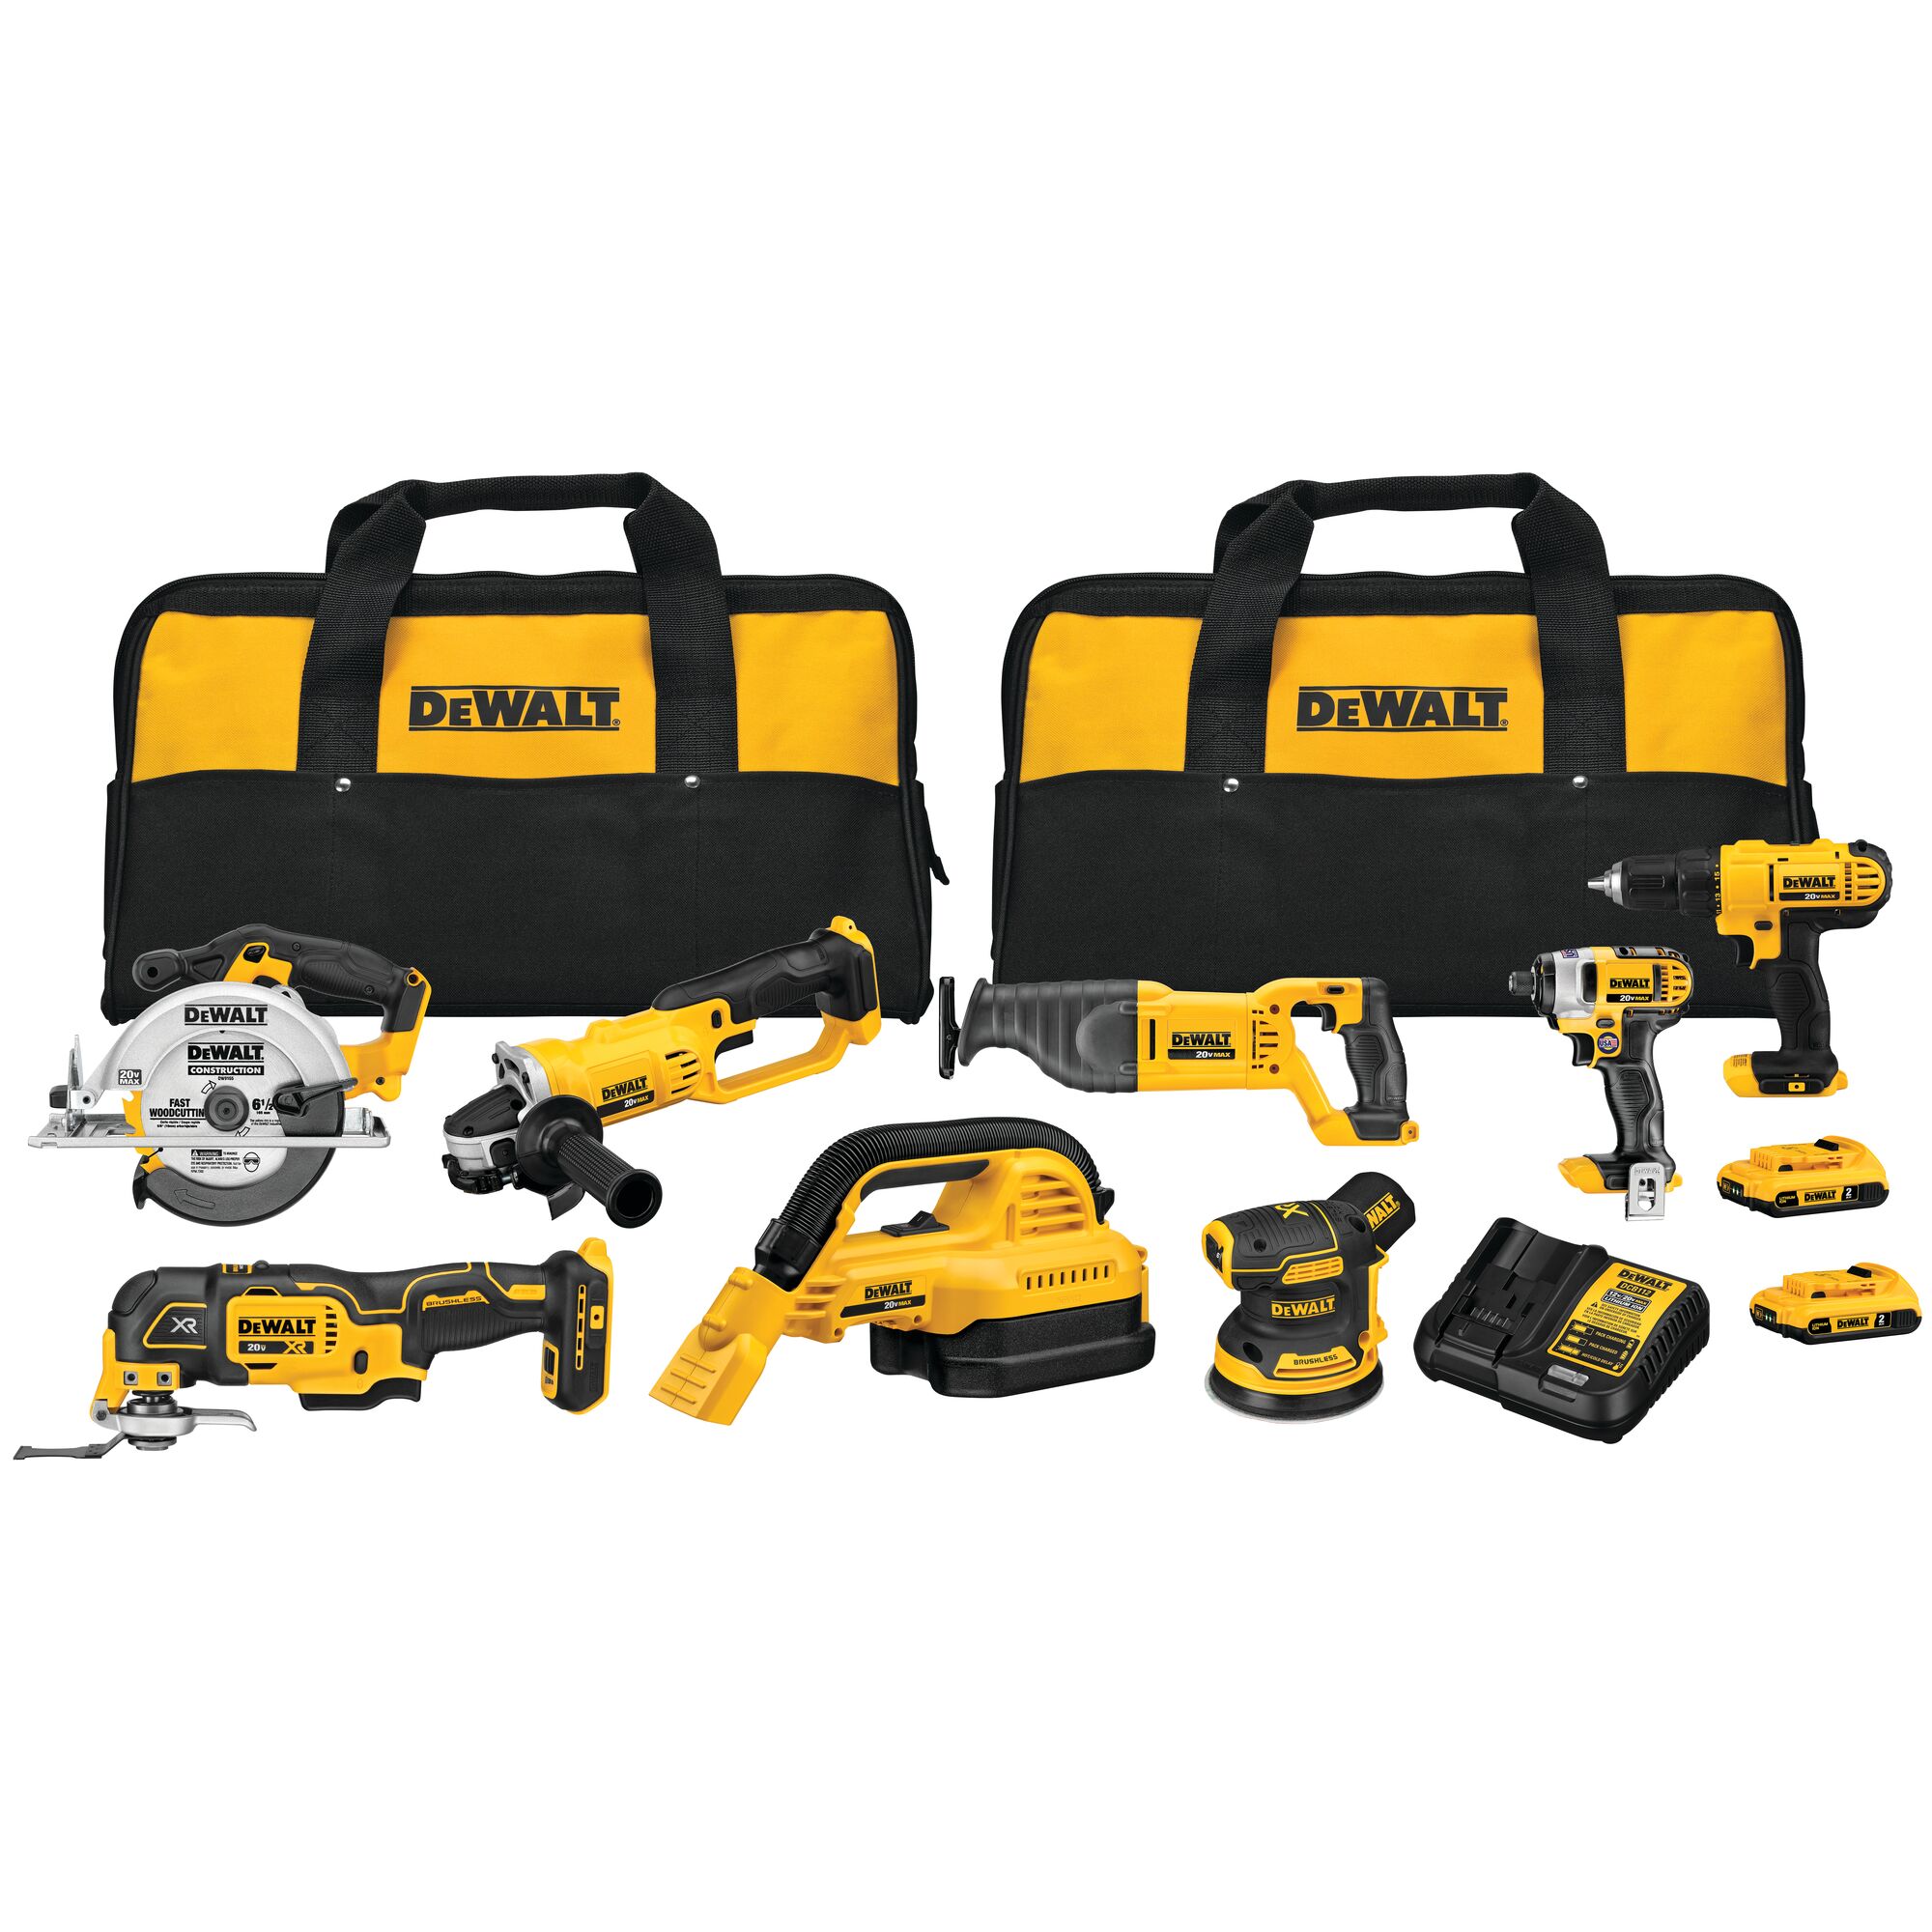 DEWALT 20V MAX Power Tool Combo Kit, 4-Tool Cordless Power Tool Set with Batteries and Charger (DCK423D2) - 3